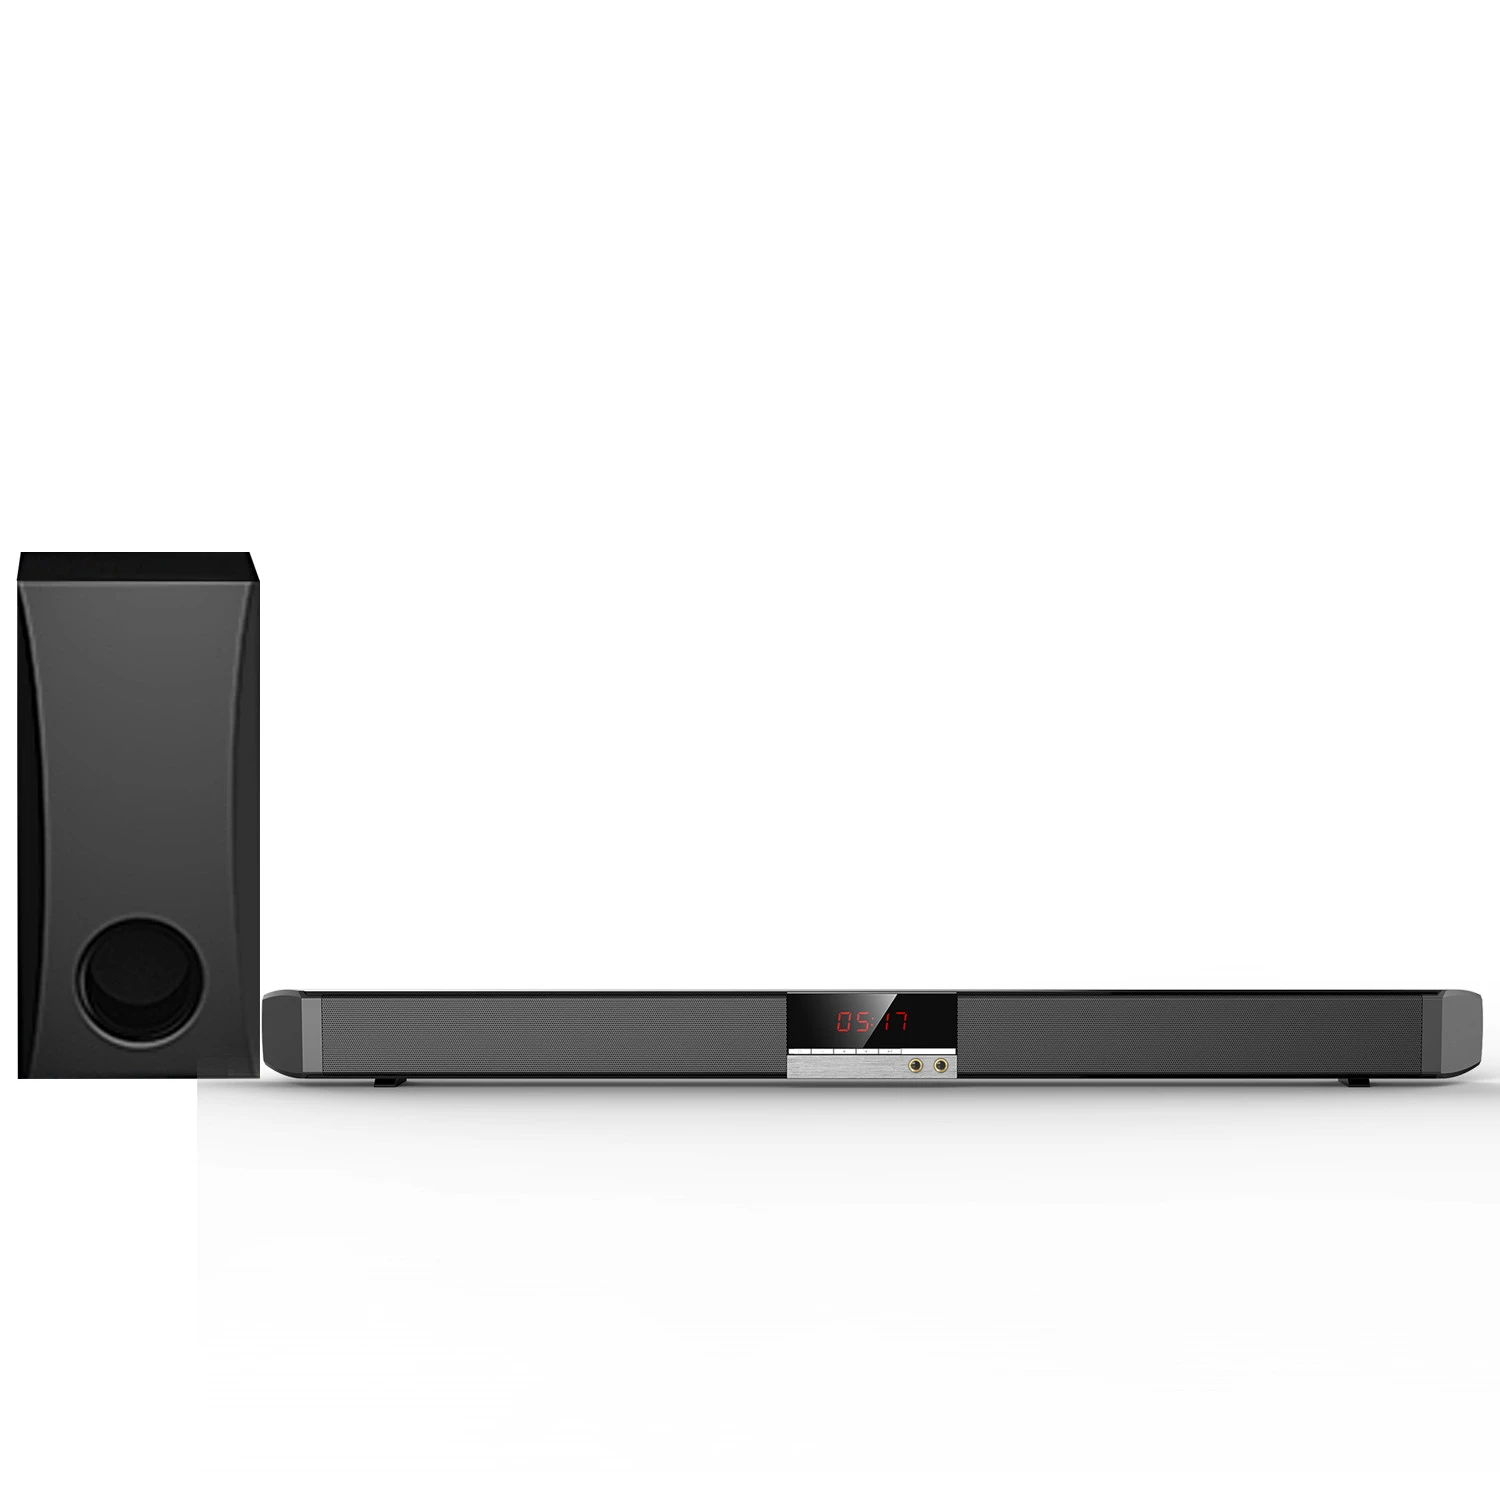 samtronic  2.1 channels wireless soundbar with subwoofer karaoke system blue tooth TV sound bar speakers with microphone karaoke